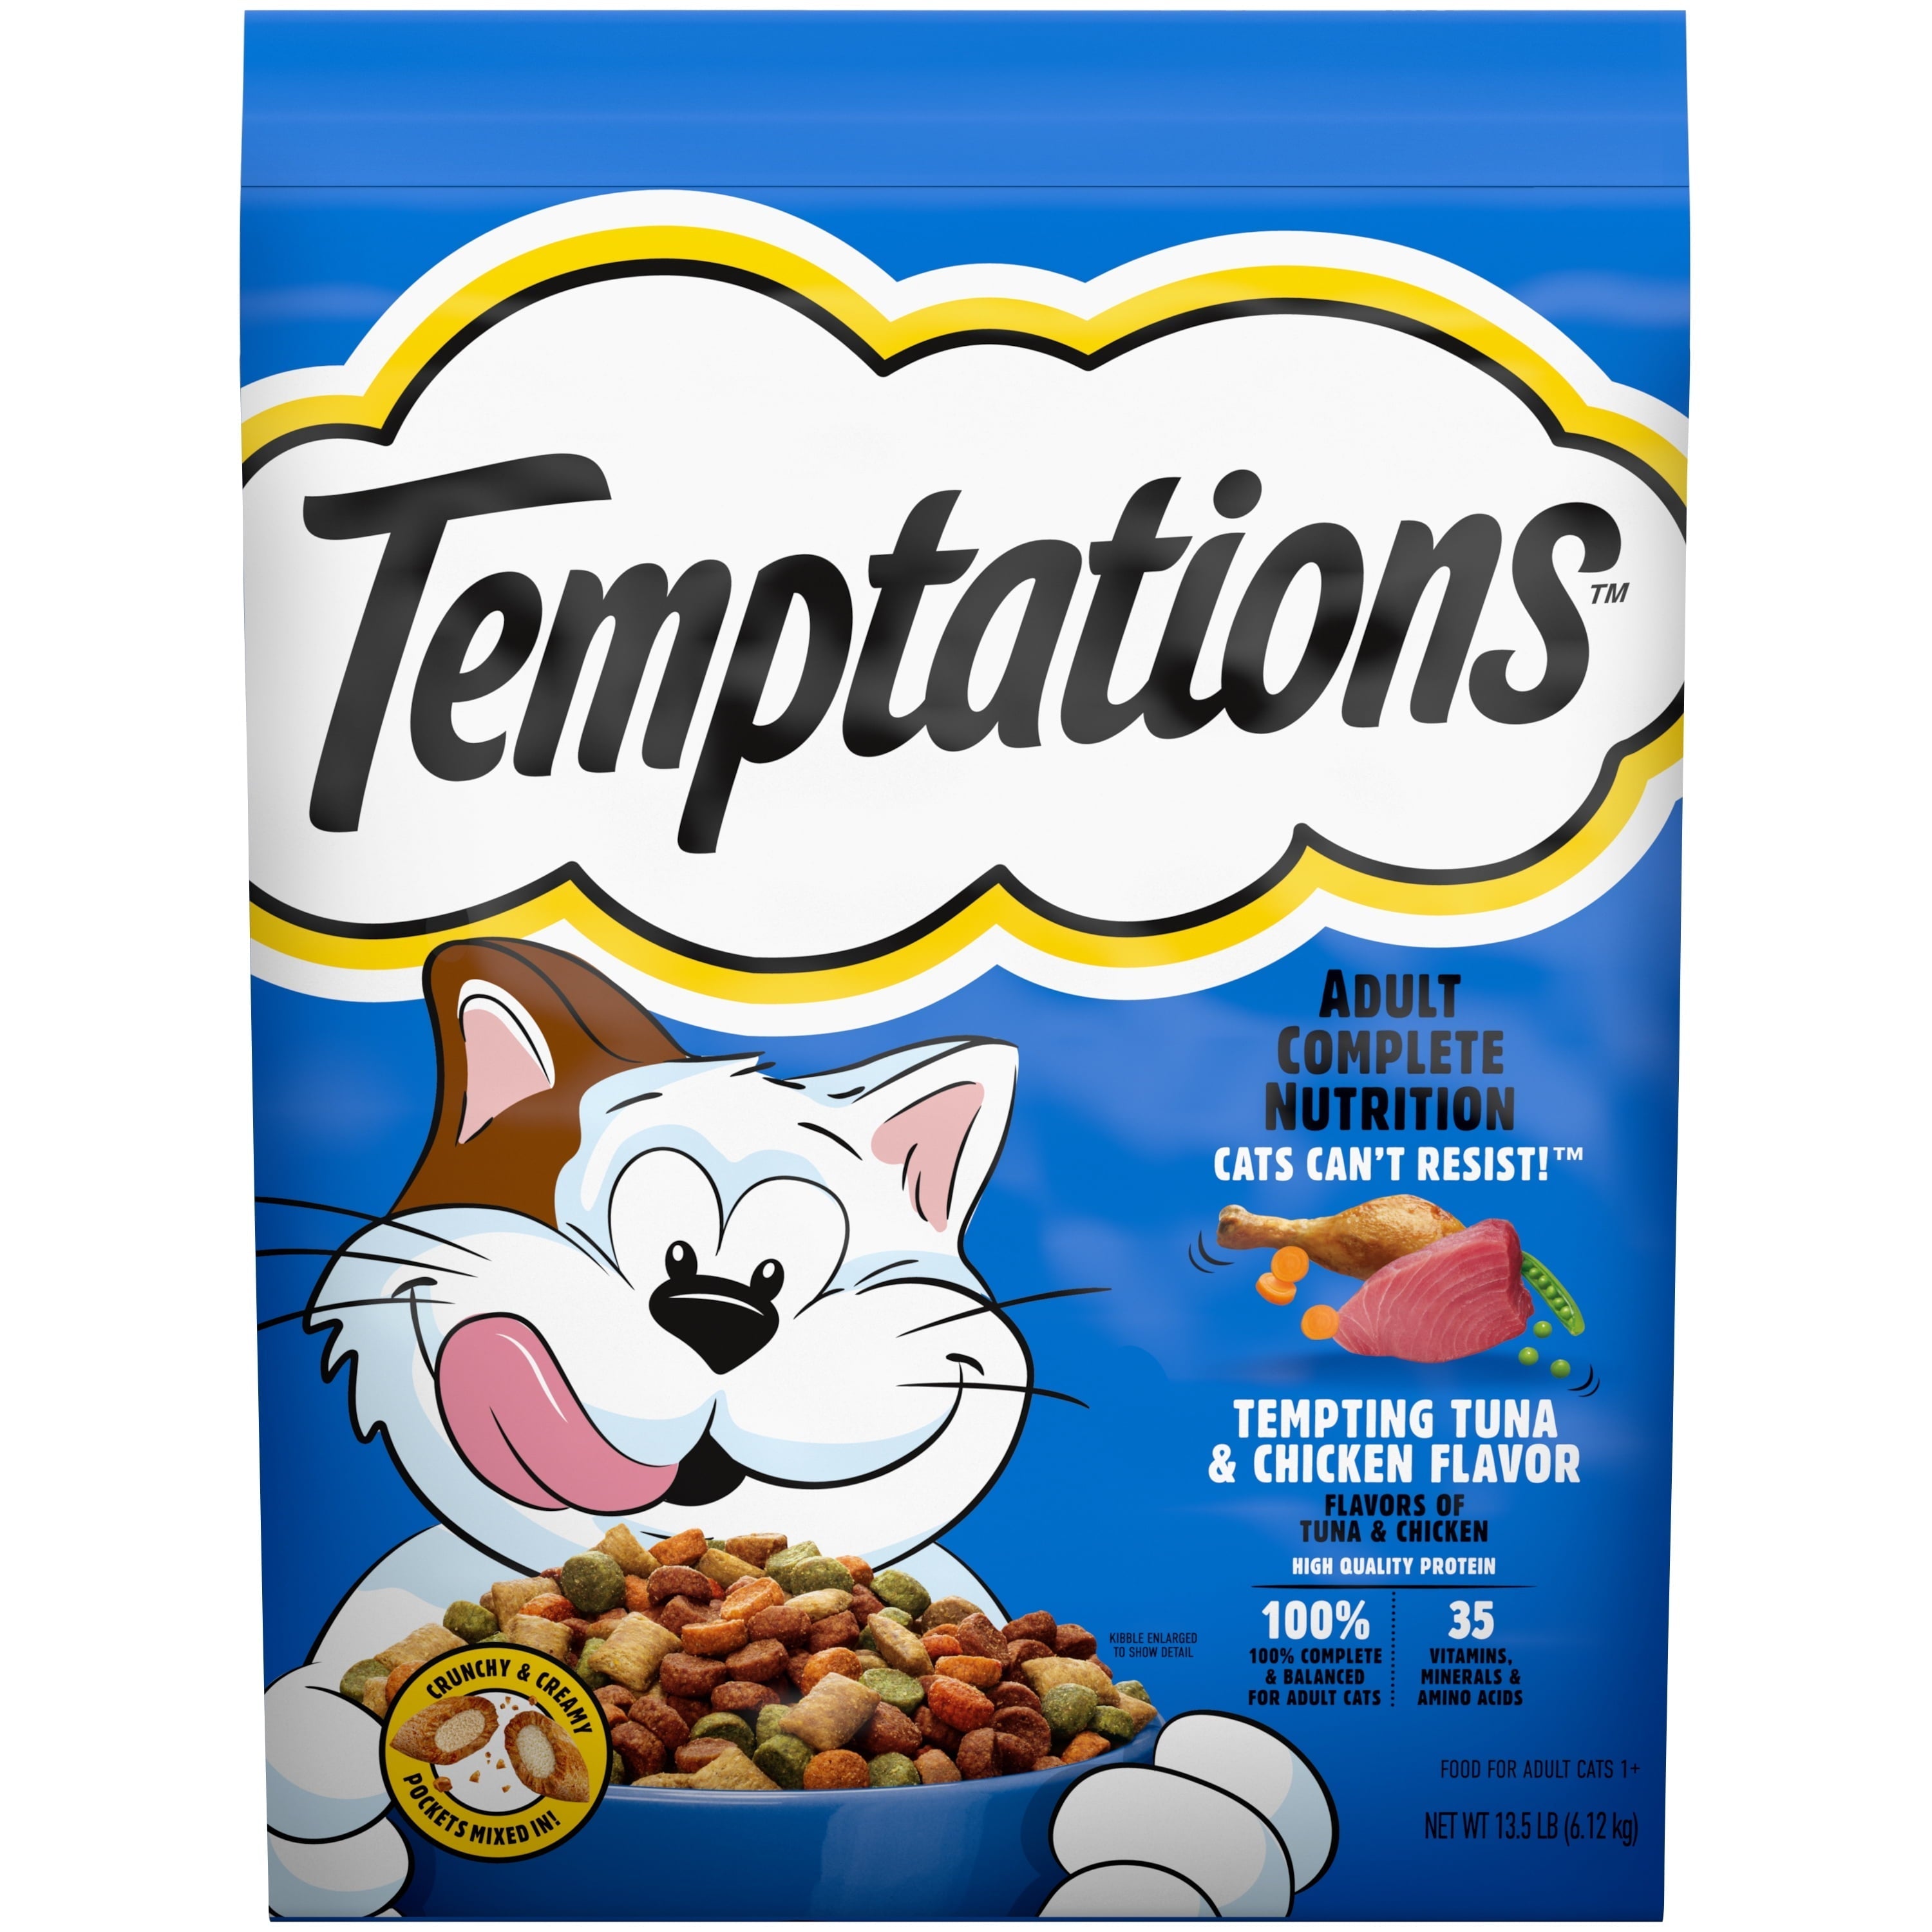 Wholesale prices with free shipping all over United States Temptations Tempting Tuna & Chicken Flavor Adult Dry Cat Food, 13.5 lb. Bag - Steven Deals